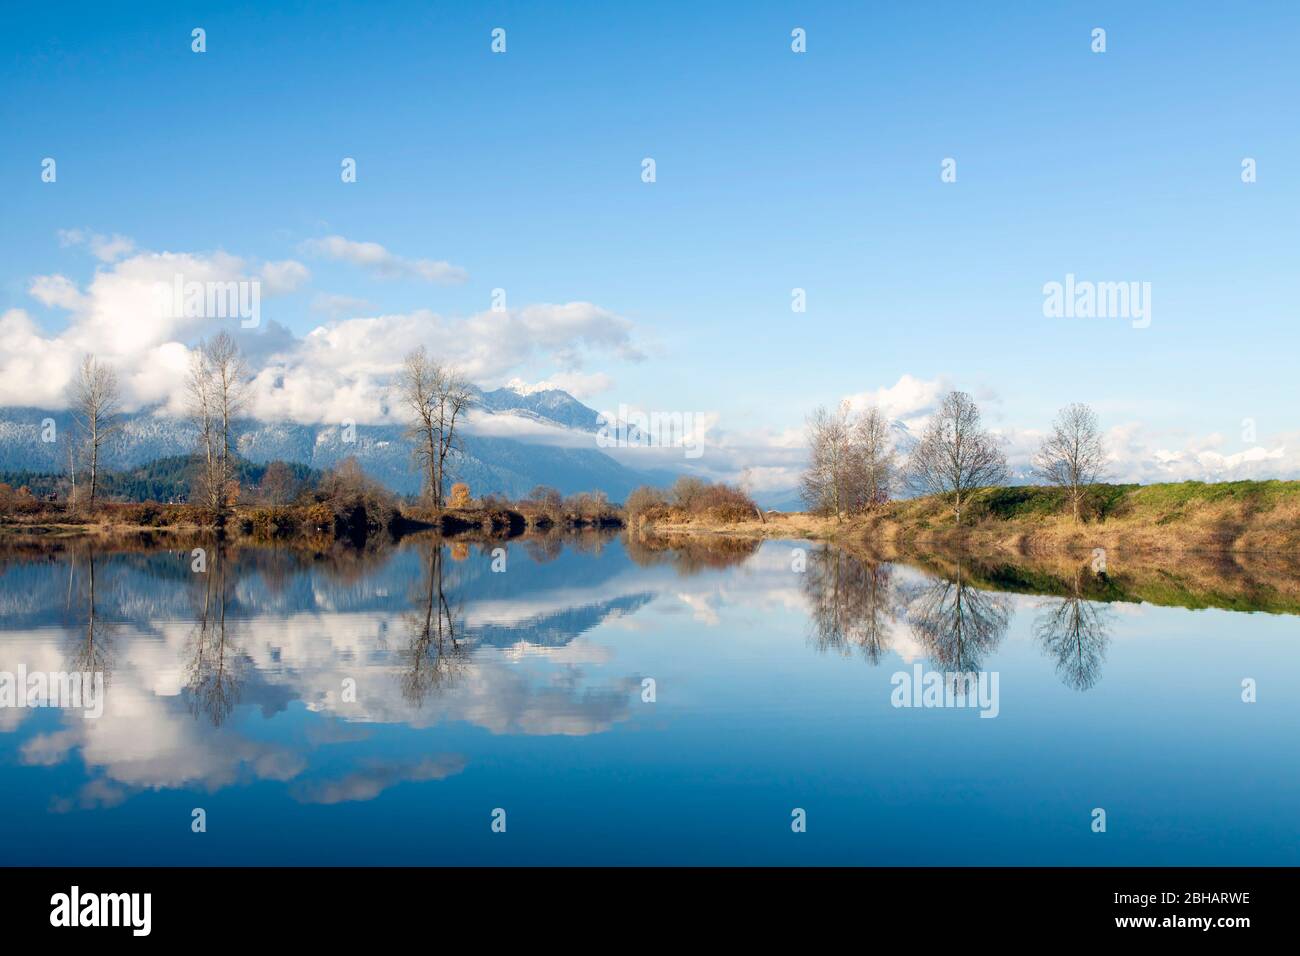 Beautiful view from historic Pitt Meadows - Maple Ridge Dykes in Greater Vancouver area, British Columbia, Canada. Stock Photo